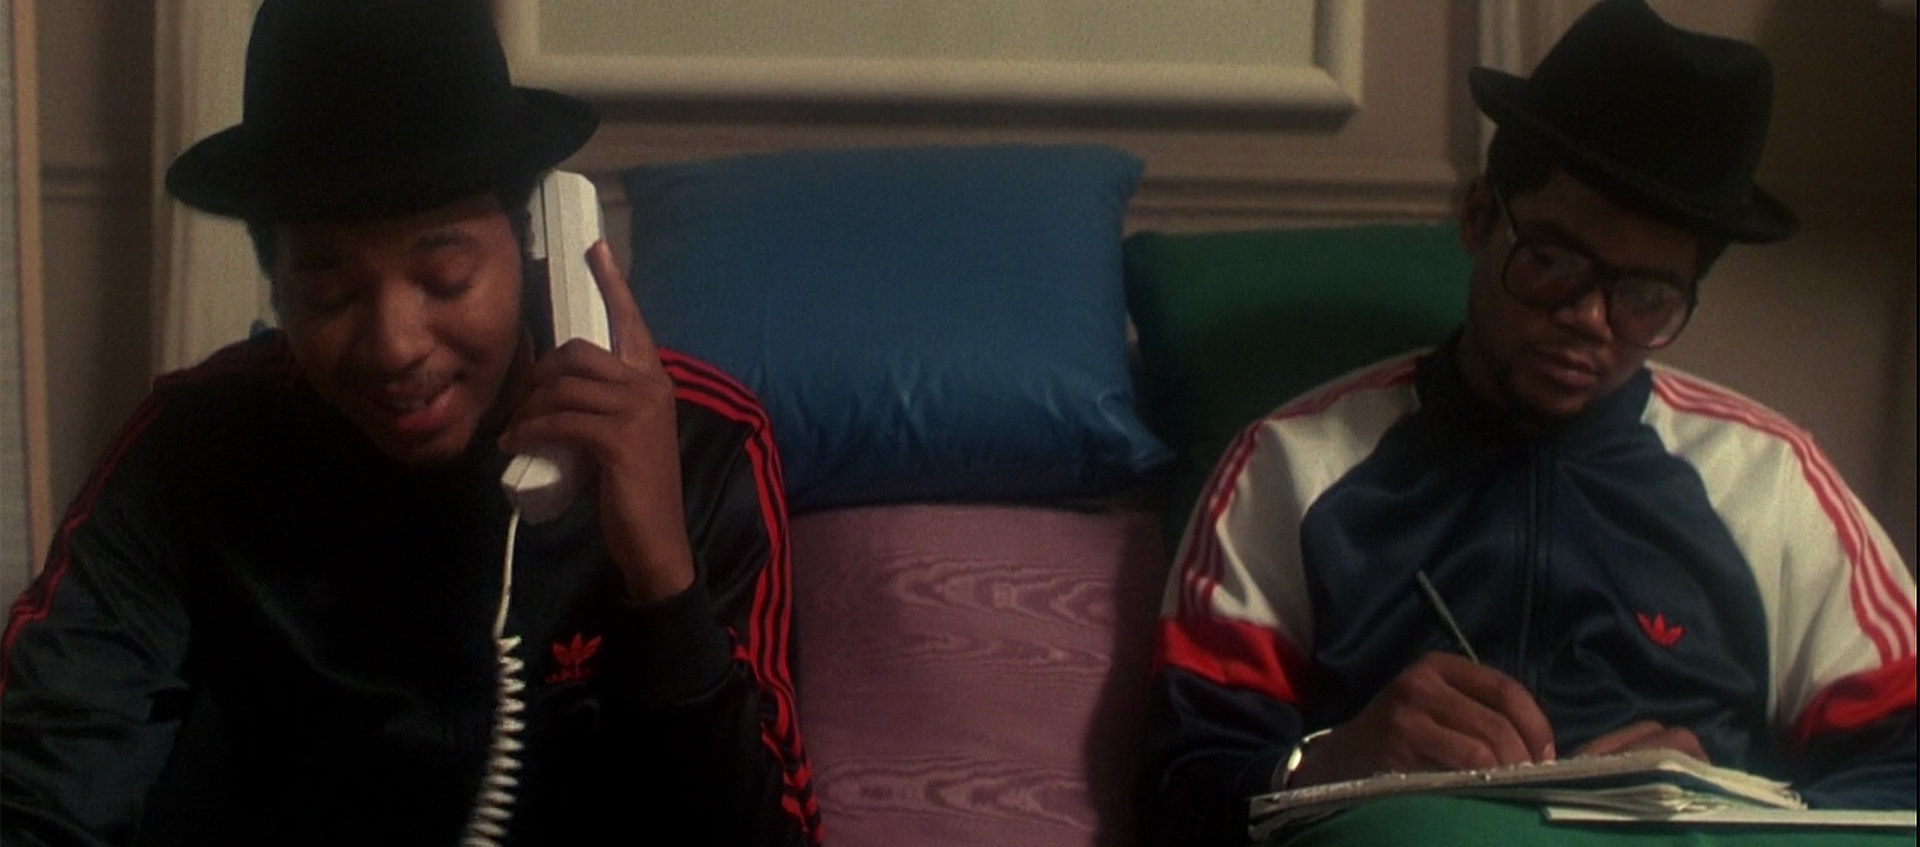 Two members of RUN DMC sit on a couch, one is on the phone while the other writes in a notebook